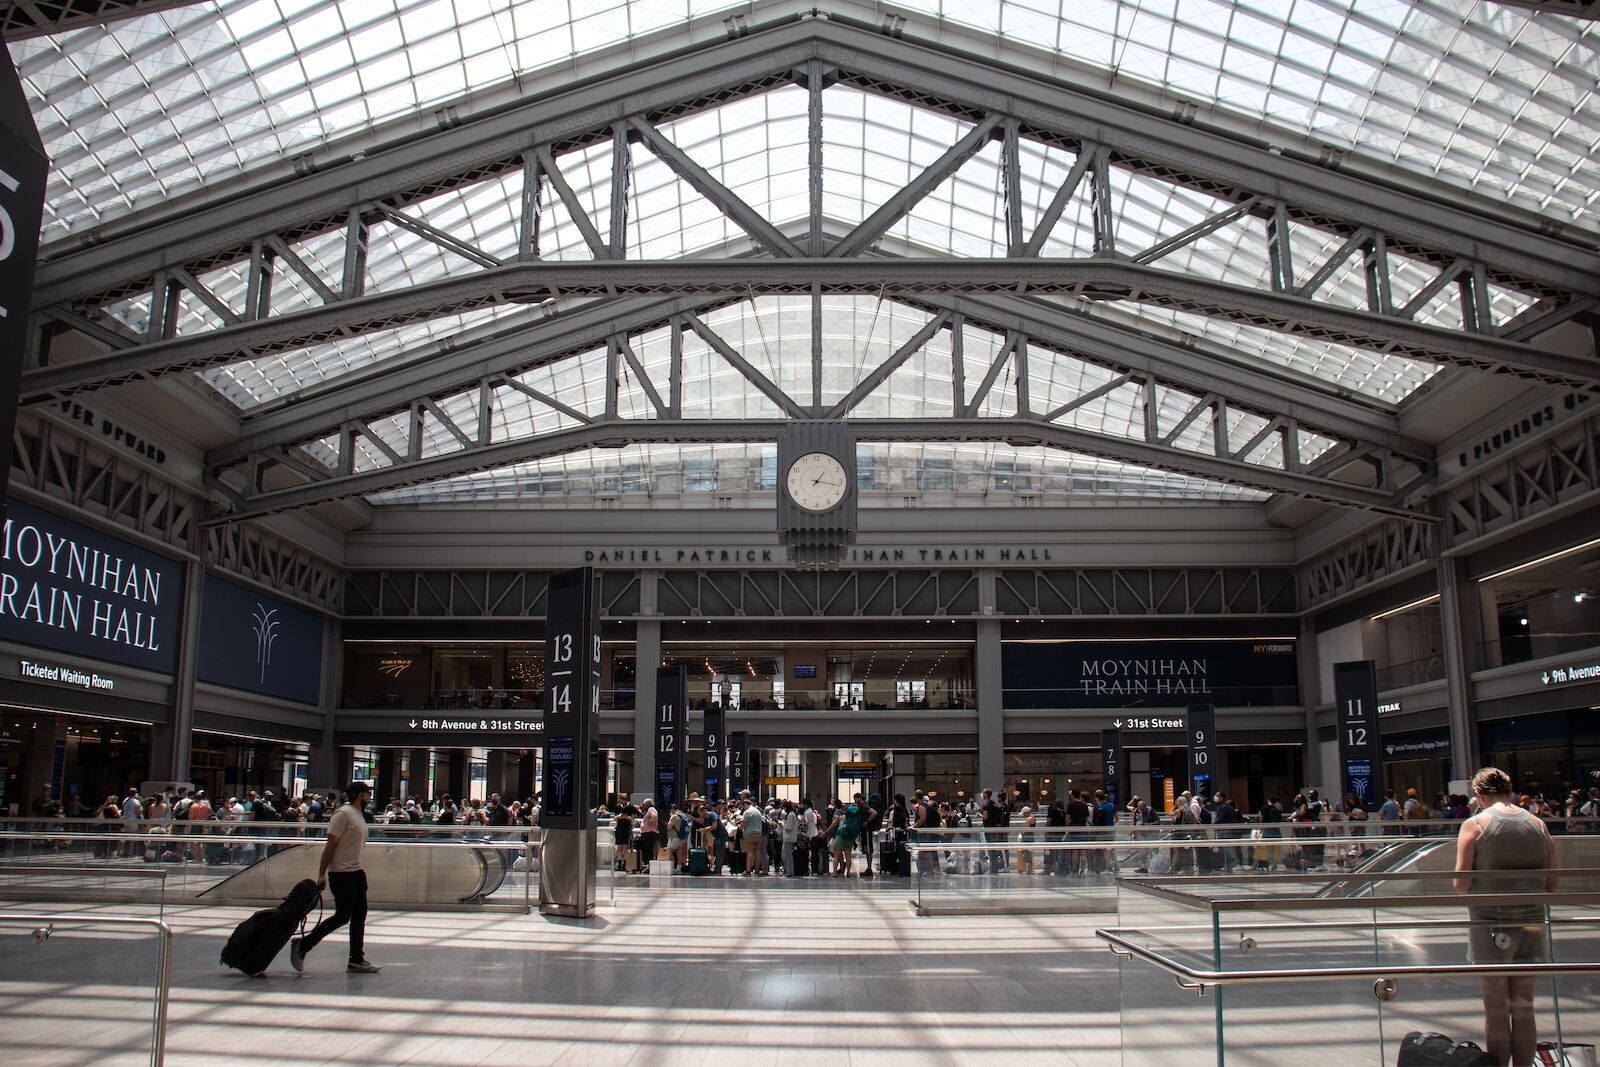 The interior of Moynihan train hall in New York City from where the Amtrak Ethan Allen express